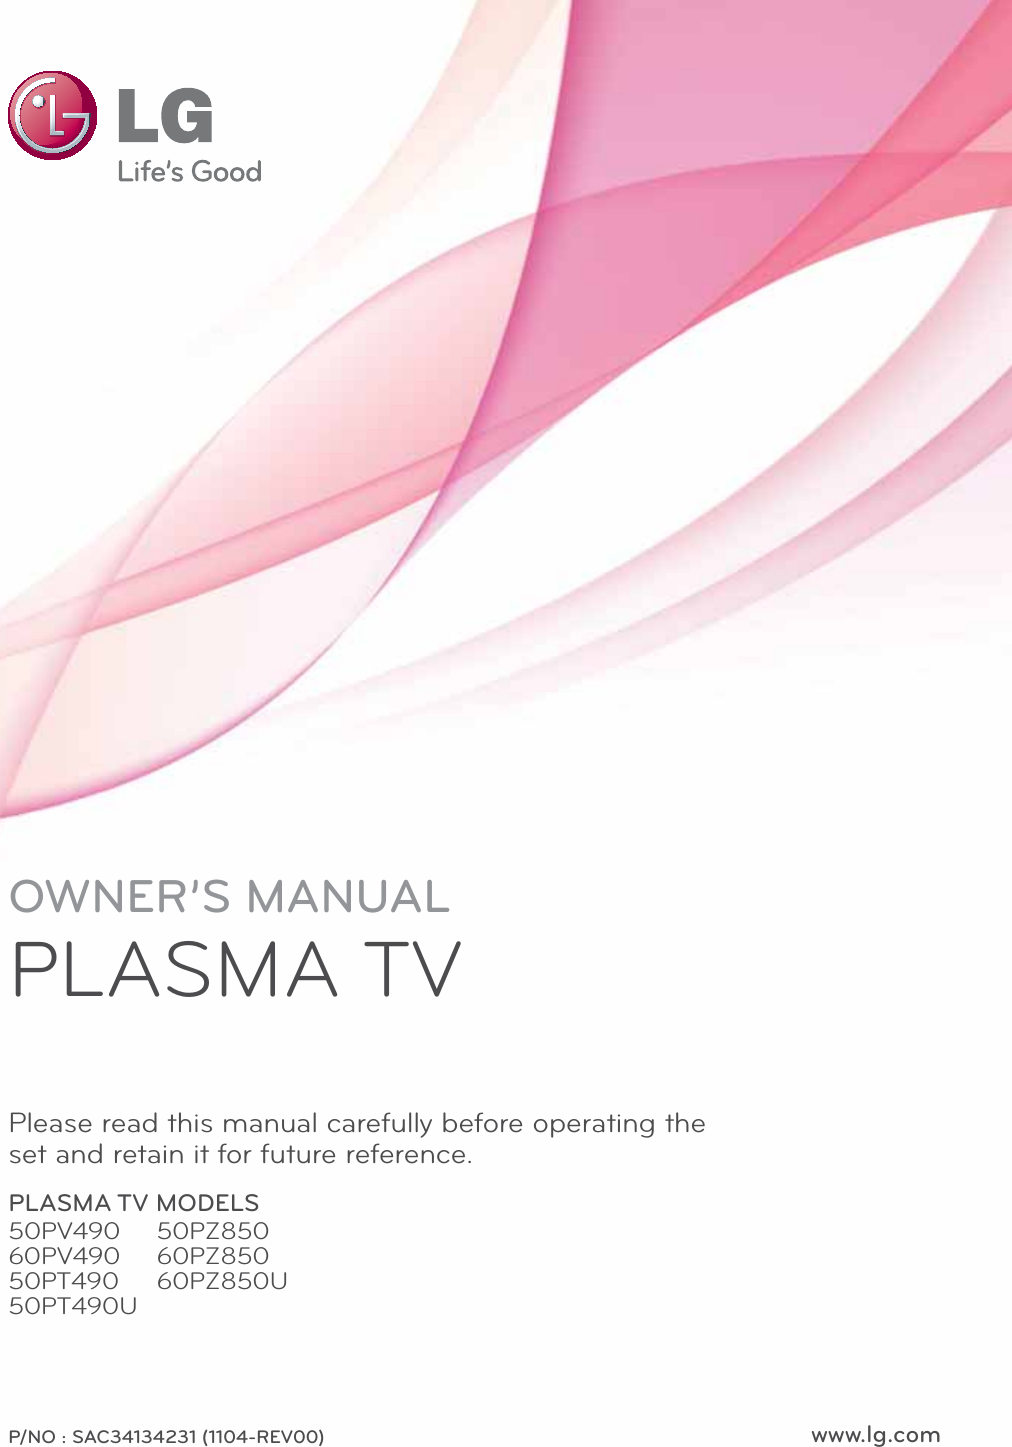 www.lg.comP/NO : SAC34134231 (1104-REV00)OWNER’S MANUAL PLASMA TVPlease read this manual carefully before operating the set and retain it for future reference.PLASMA TV MODELS50PV49060PV49050PT49050PT490U50PZ85060PZ85060PZ850U